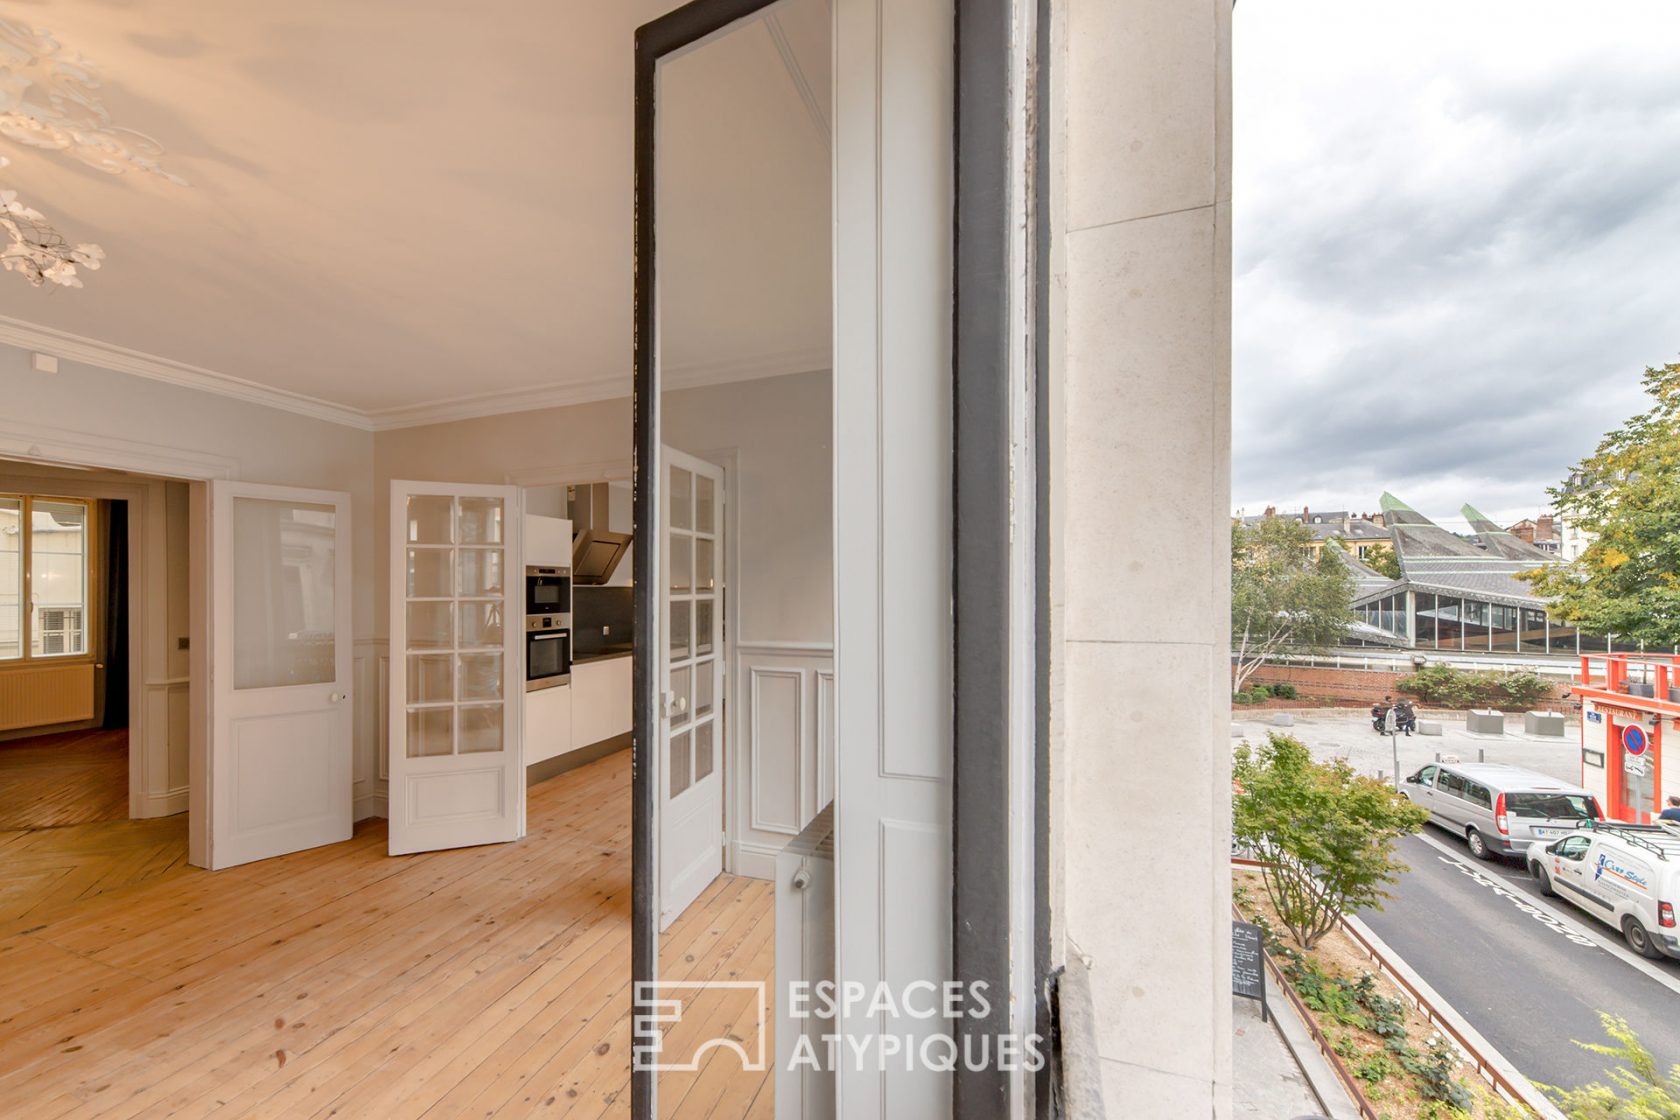 Haussmannian renovated in the heart of the historic district